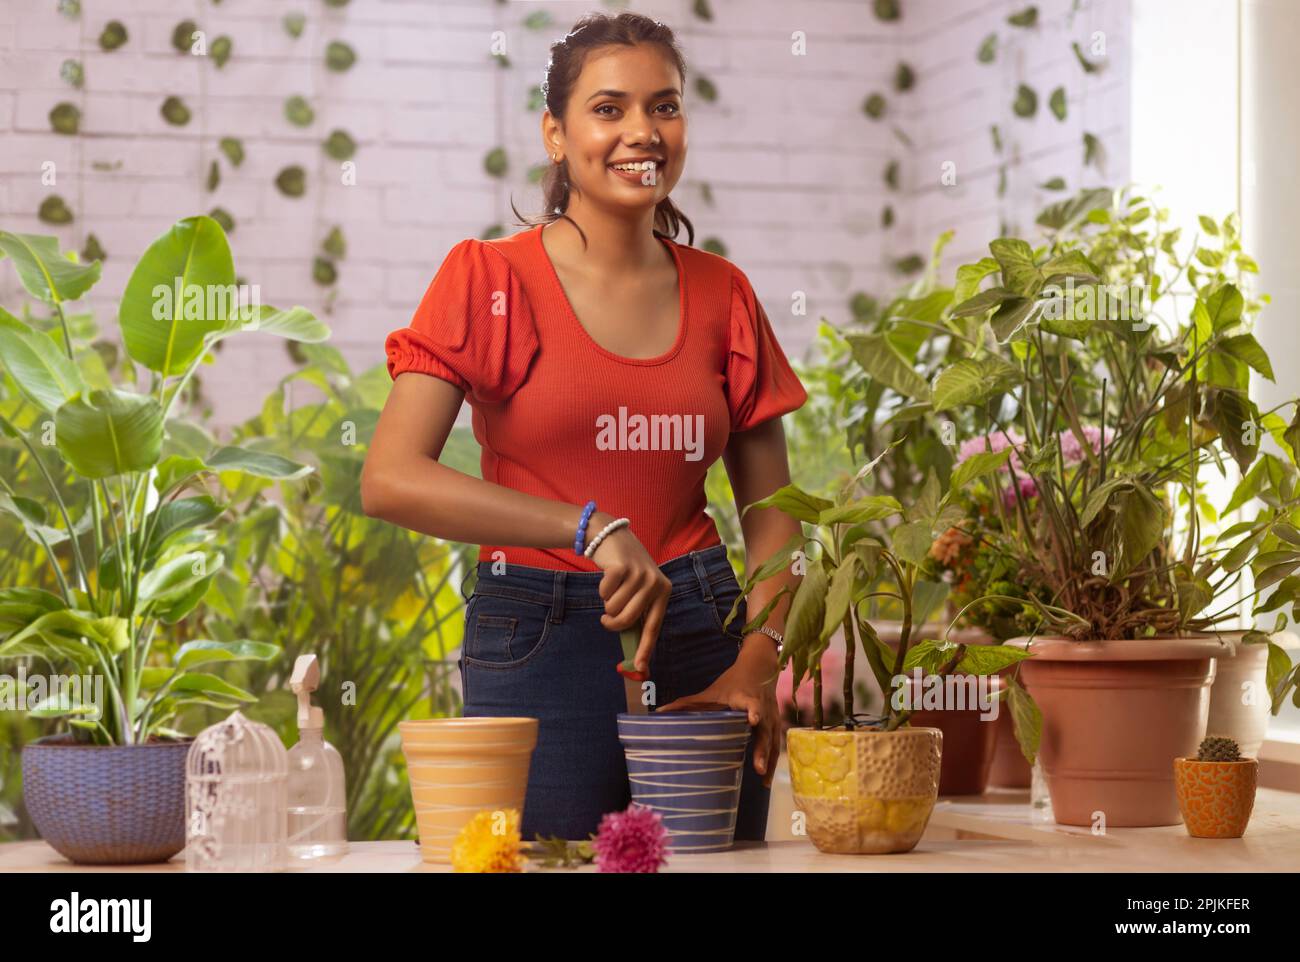 Young woman gardening at home Stock Photo